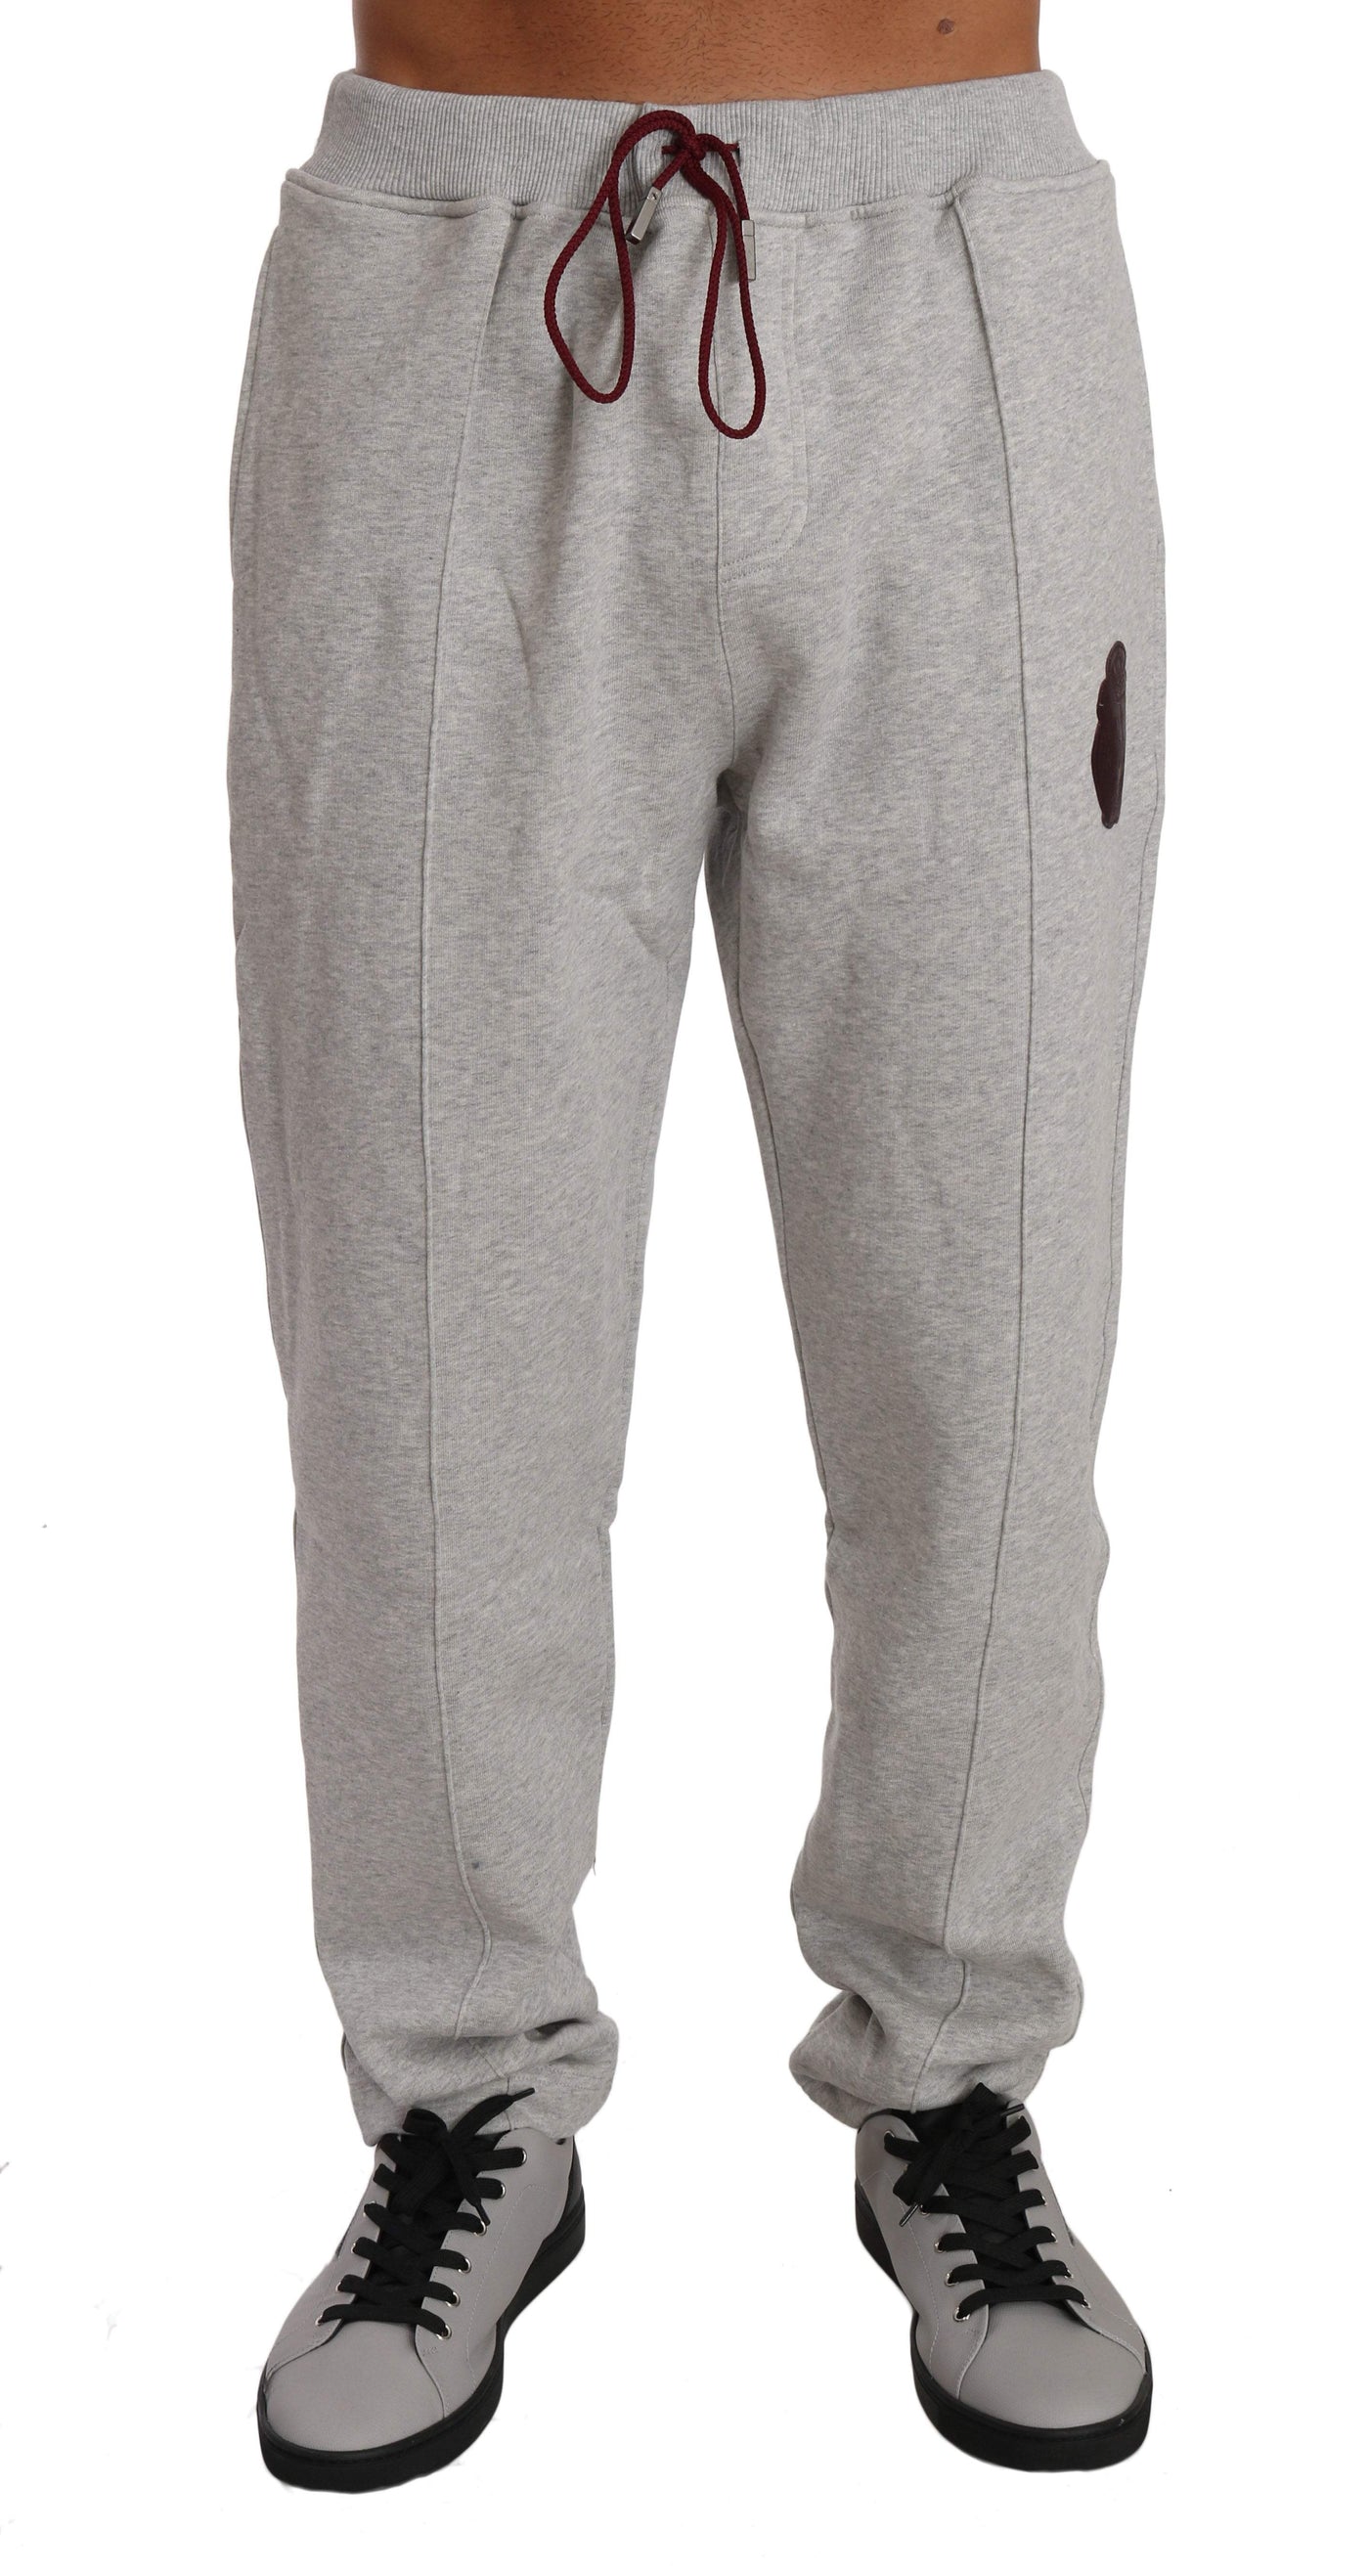 Billionaire Italian Couture  Cotton Hooded Sweater Pants Tracksuit #men, 3XL, Billionaire Italian Couture, Catch, feed-agegroup-adult, feed-color-gray, feed-gender-male, feed-size-3XL, feed-size-XL, feed-size-XXL, Gender_Men, Gray, Kogan, M, Men - New Arrivals, Sweatsuit - Men - Clothing, XL, XXL at SEYMAYKA